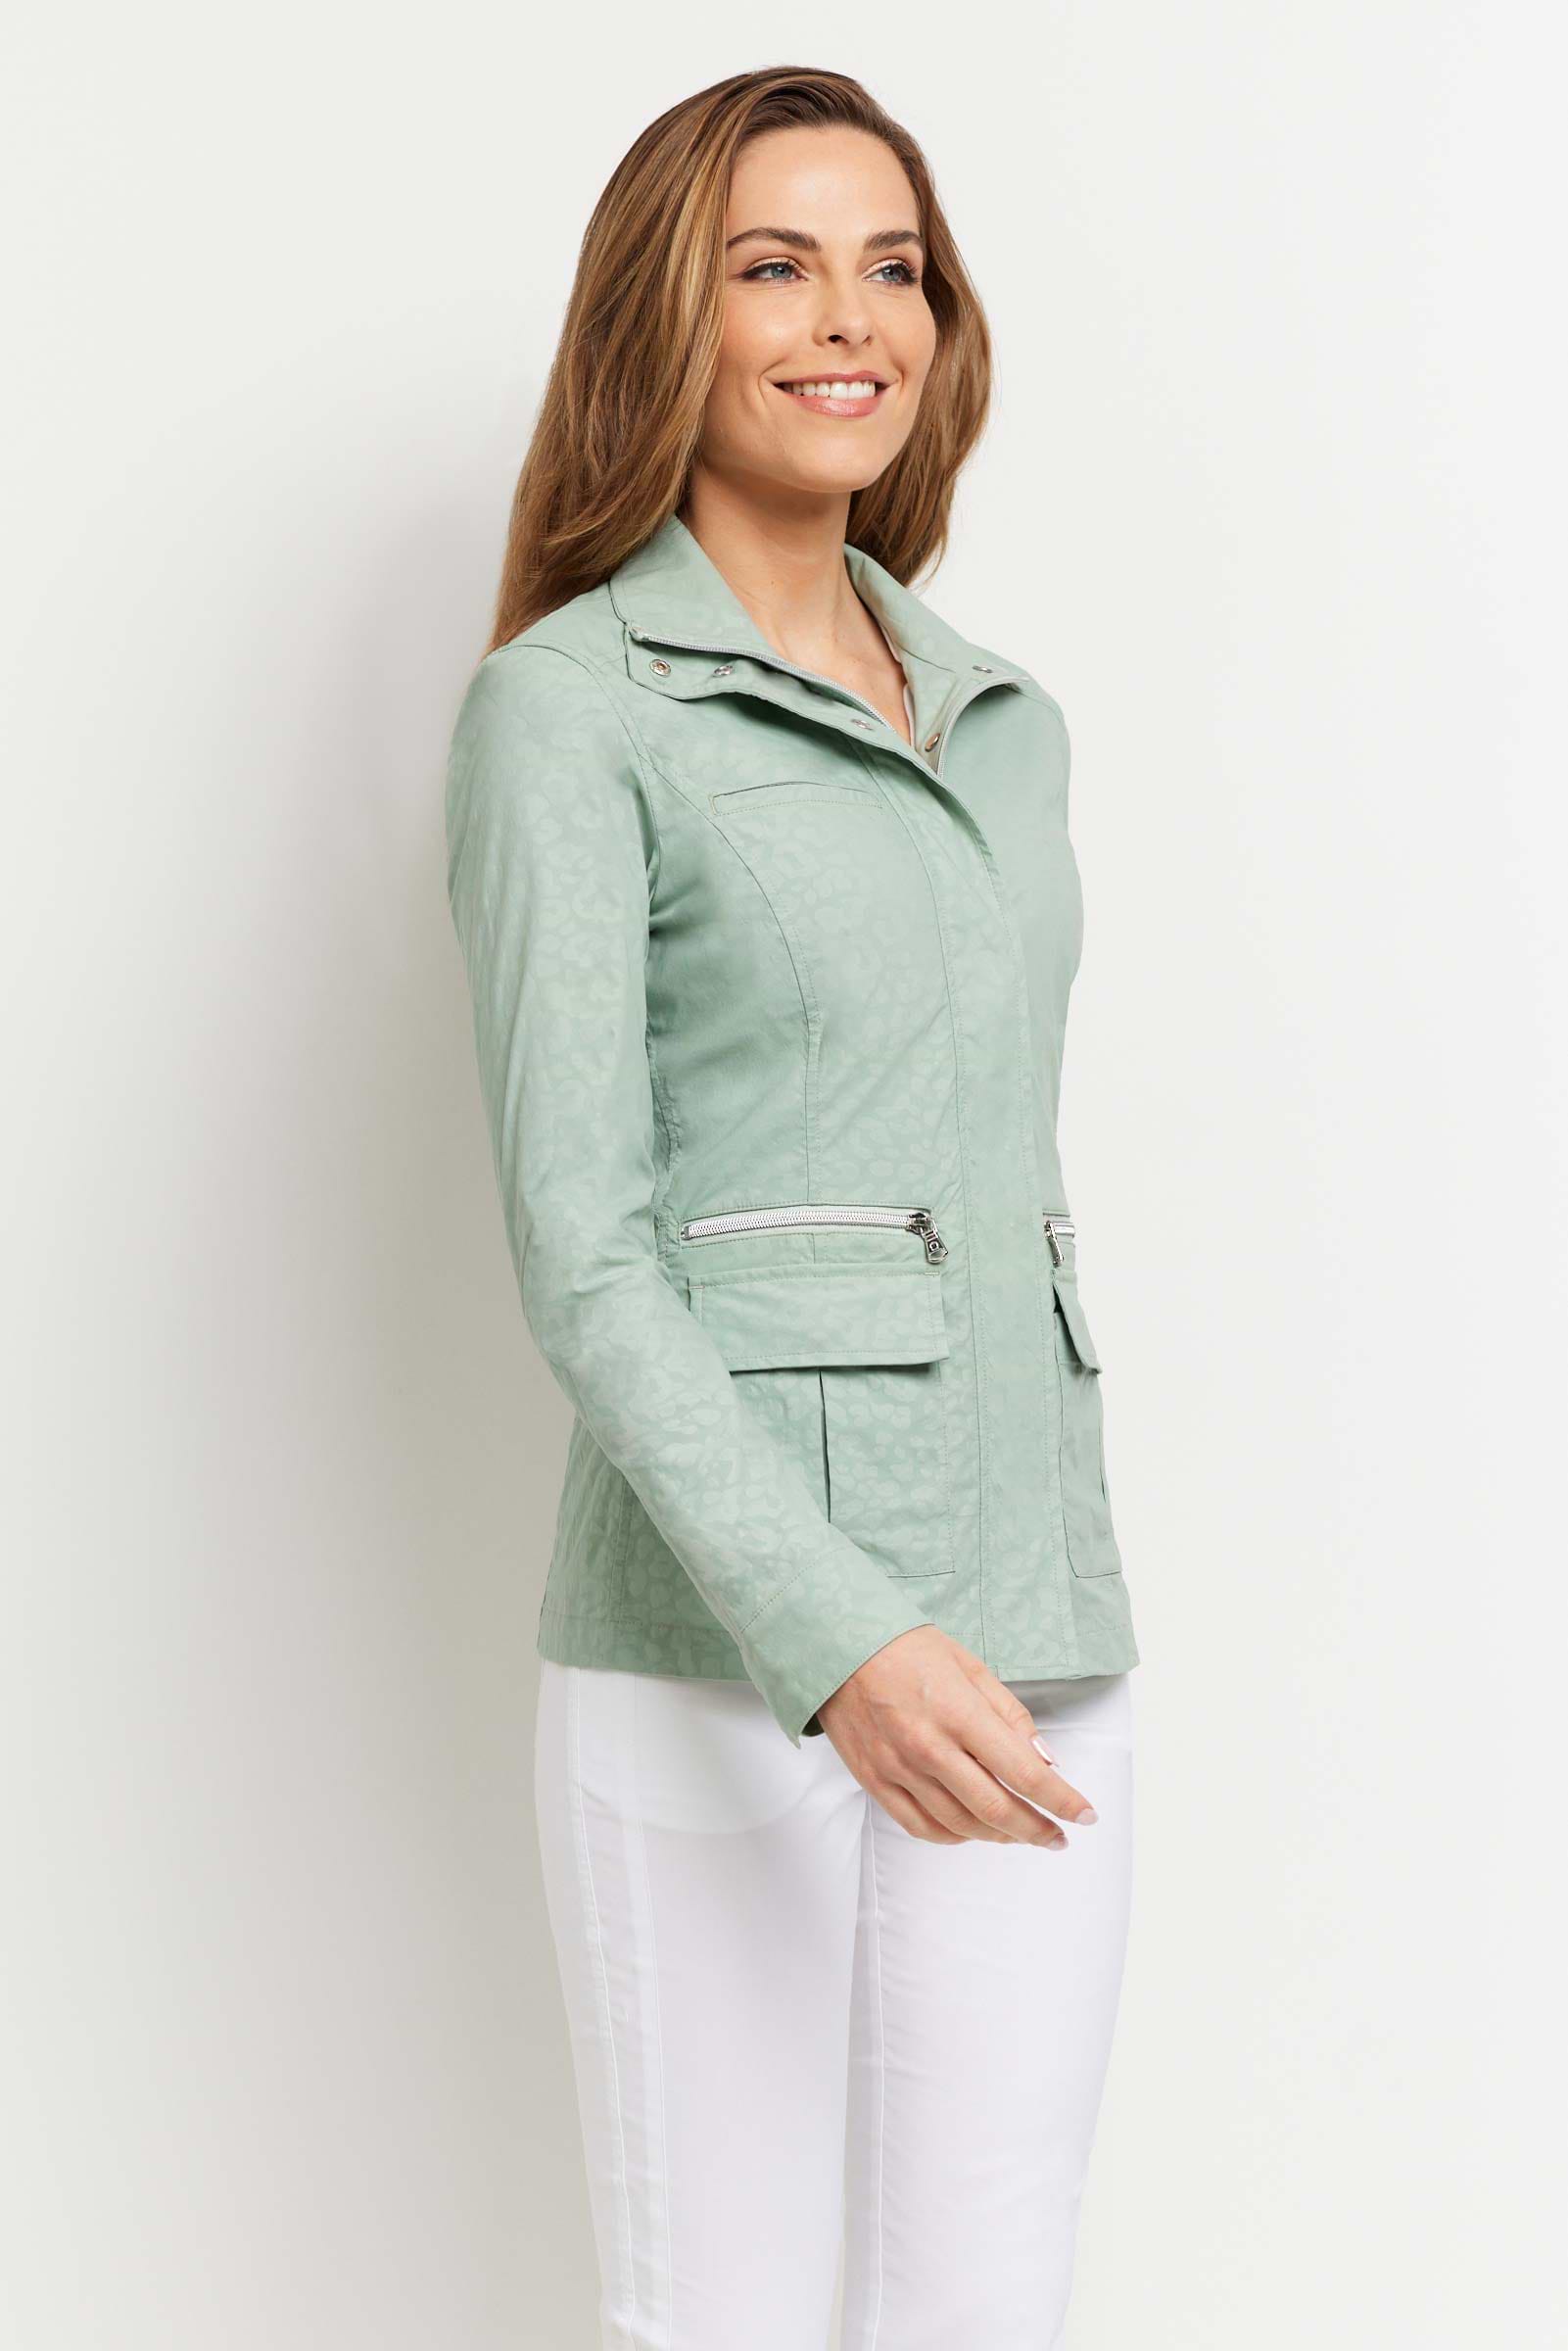 The Best Travel Jacket. Woman Showing the Side Profile of an Embossed Kenya Jacket in Cheetah Sage.